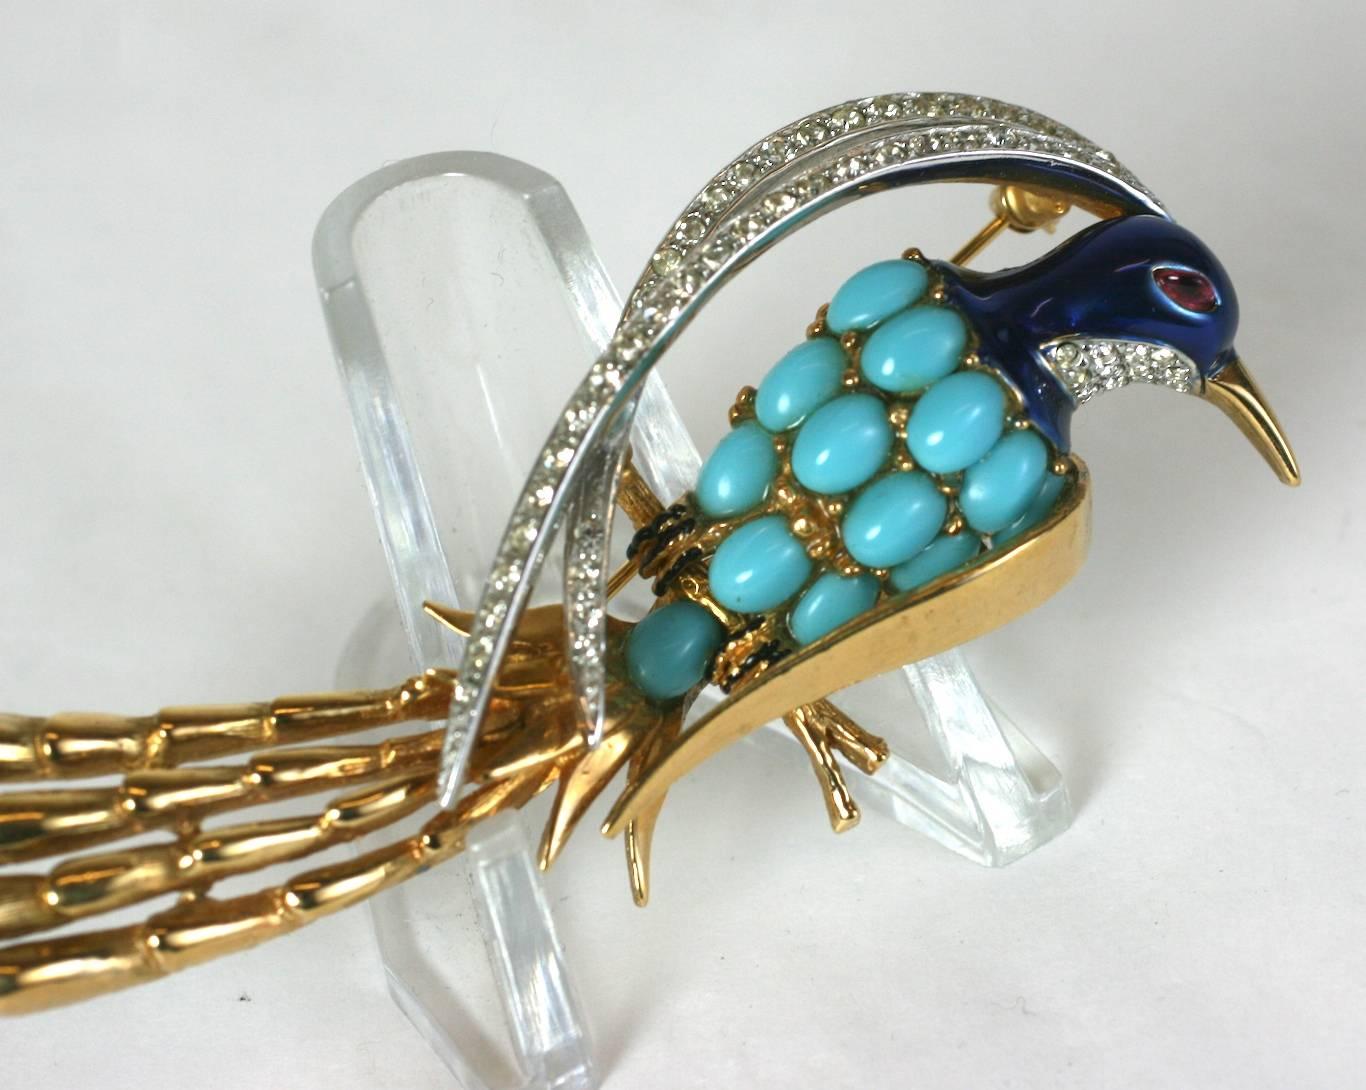 Wonderful Marcel Boucher Bird of Paradise made in prevailing style of fine jewelers of the 1960's. Animalia became a theme carried by all the fine jewelers such as Tiffany, Van Cleef and Cartier. 
Marcel Boucher started his career in the fine